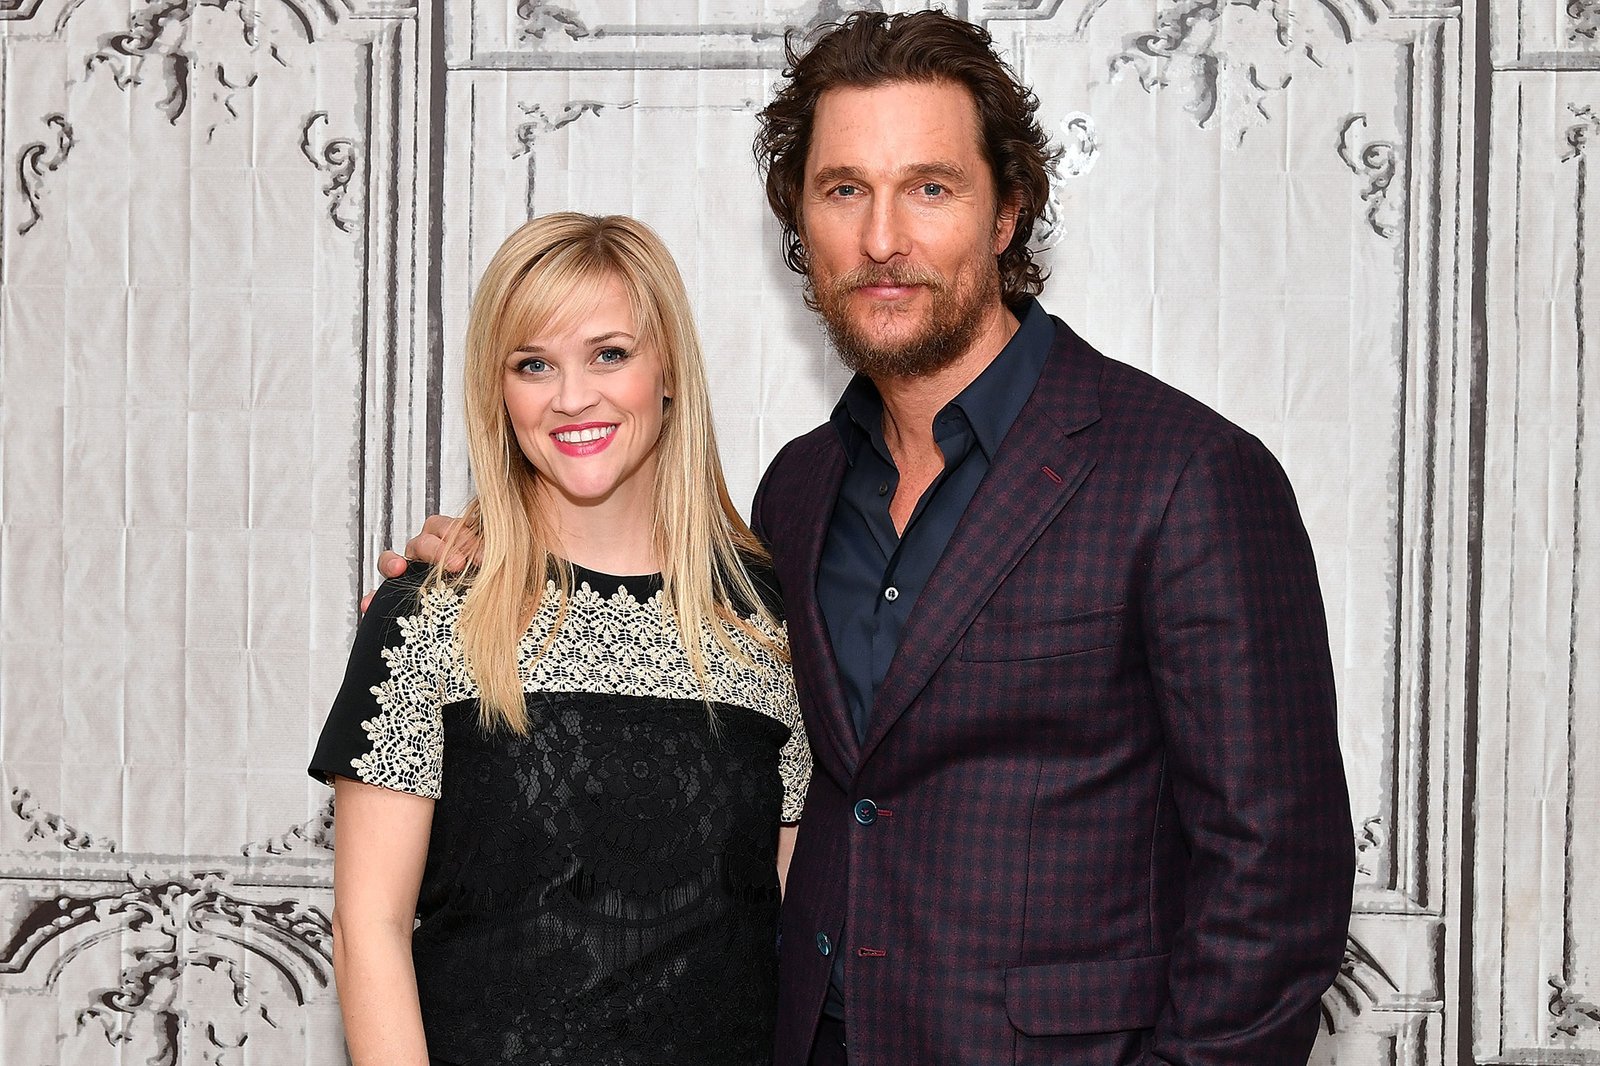 Matthew McConaughey admits to crushing on Reese Witherspoon